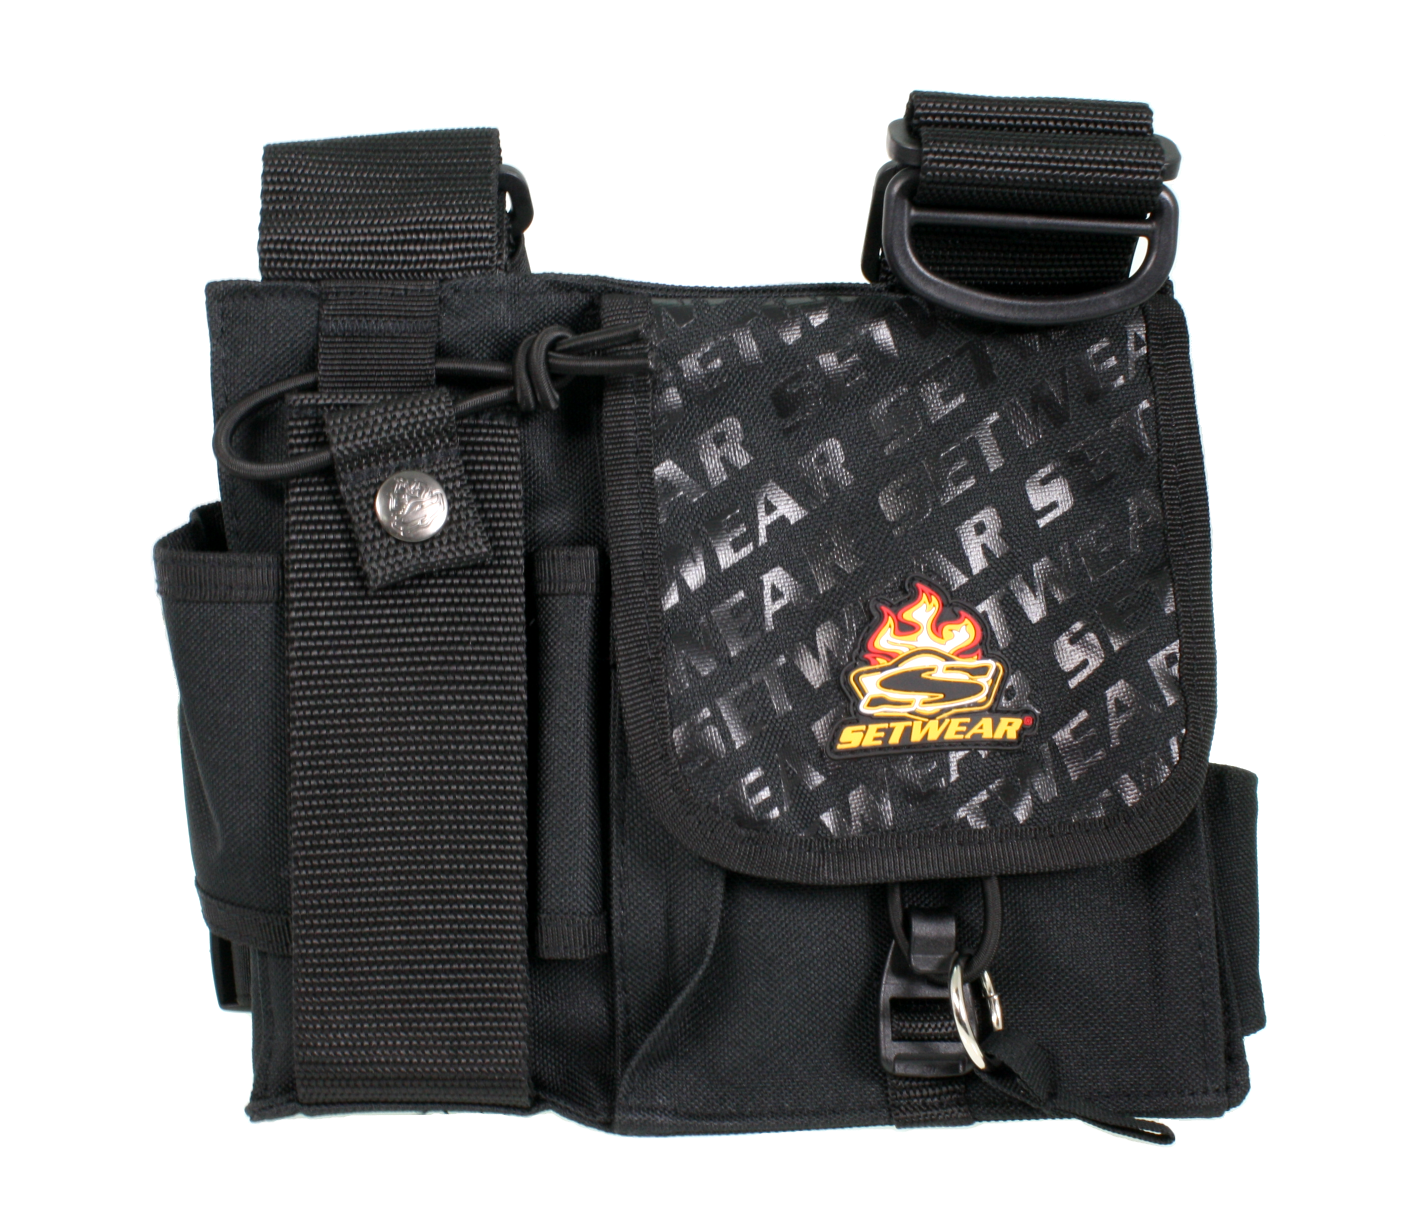 Front of the chest pack